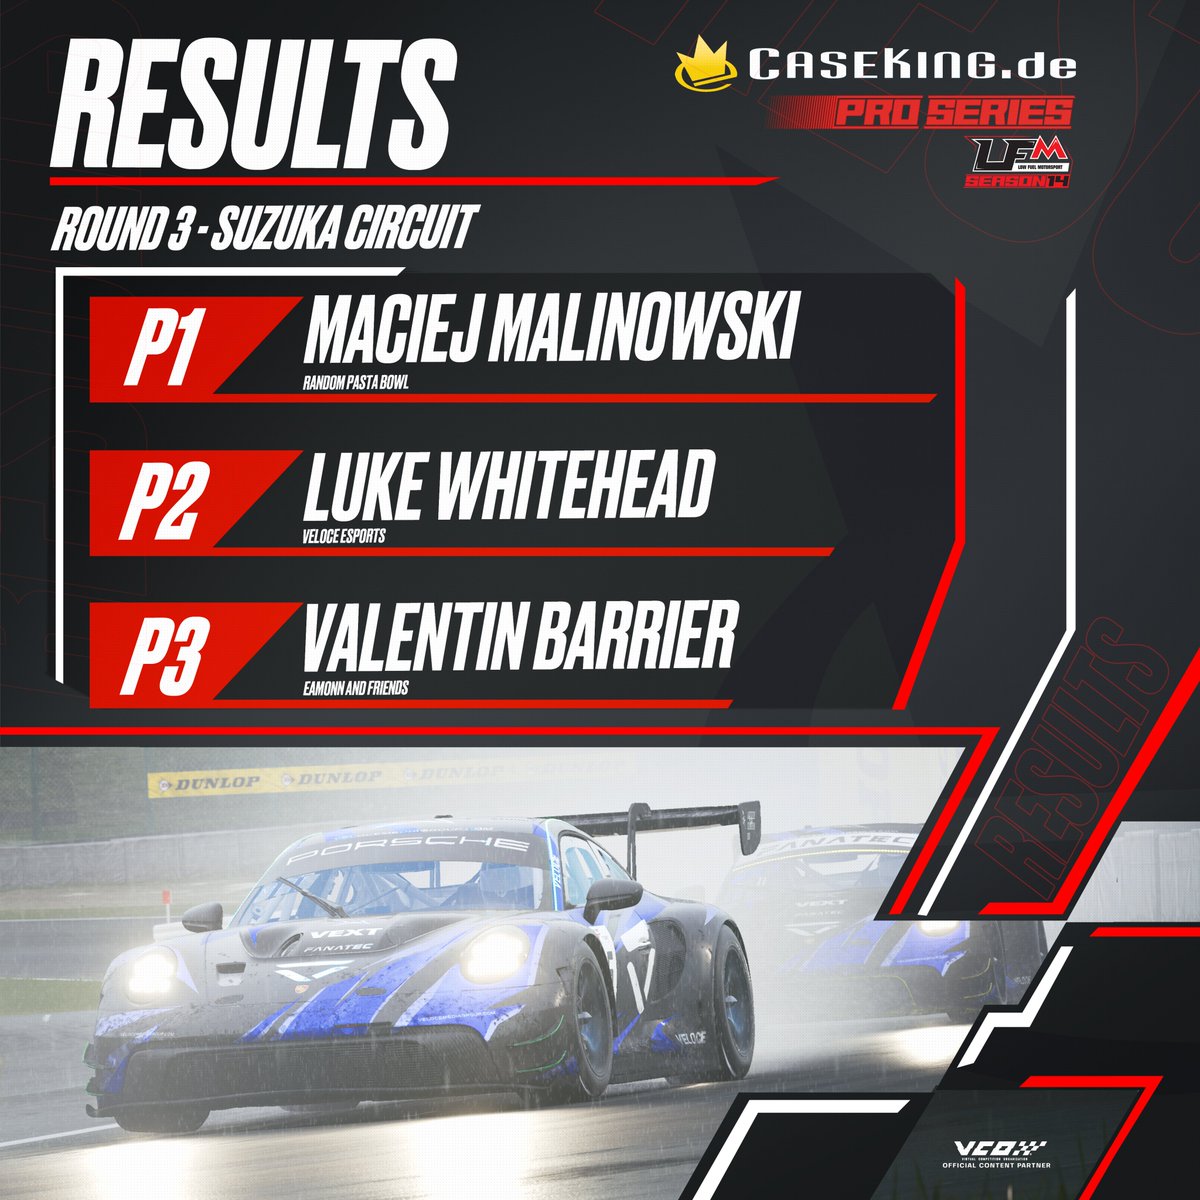 In last week's @Caseking PRO Series race, only drivers who could cope with the most difficult conditions could win. After a race full of defending, @tortellinnii snatched the top spot on the podium in the end. @LukeW_Racing and @ValentinGoBrr took P2 & P3 after a great…